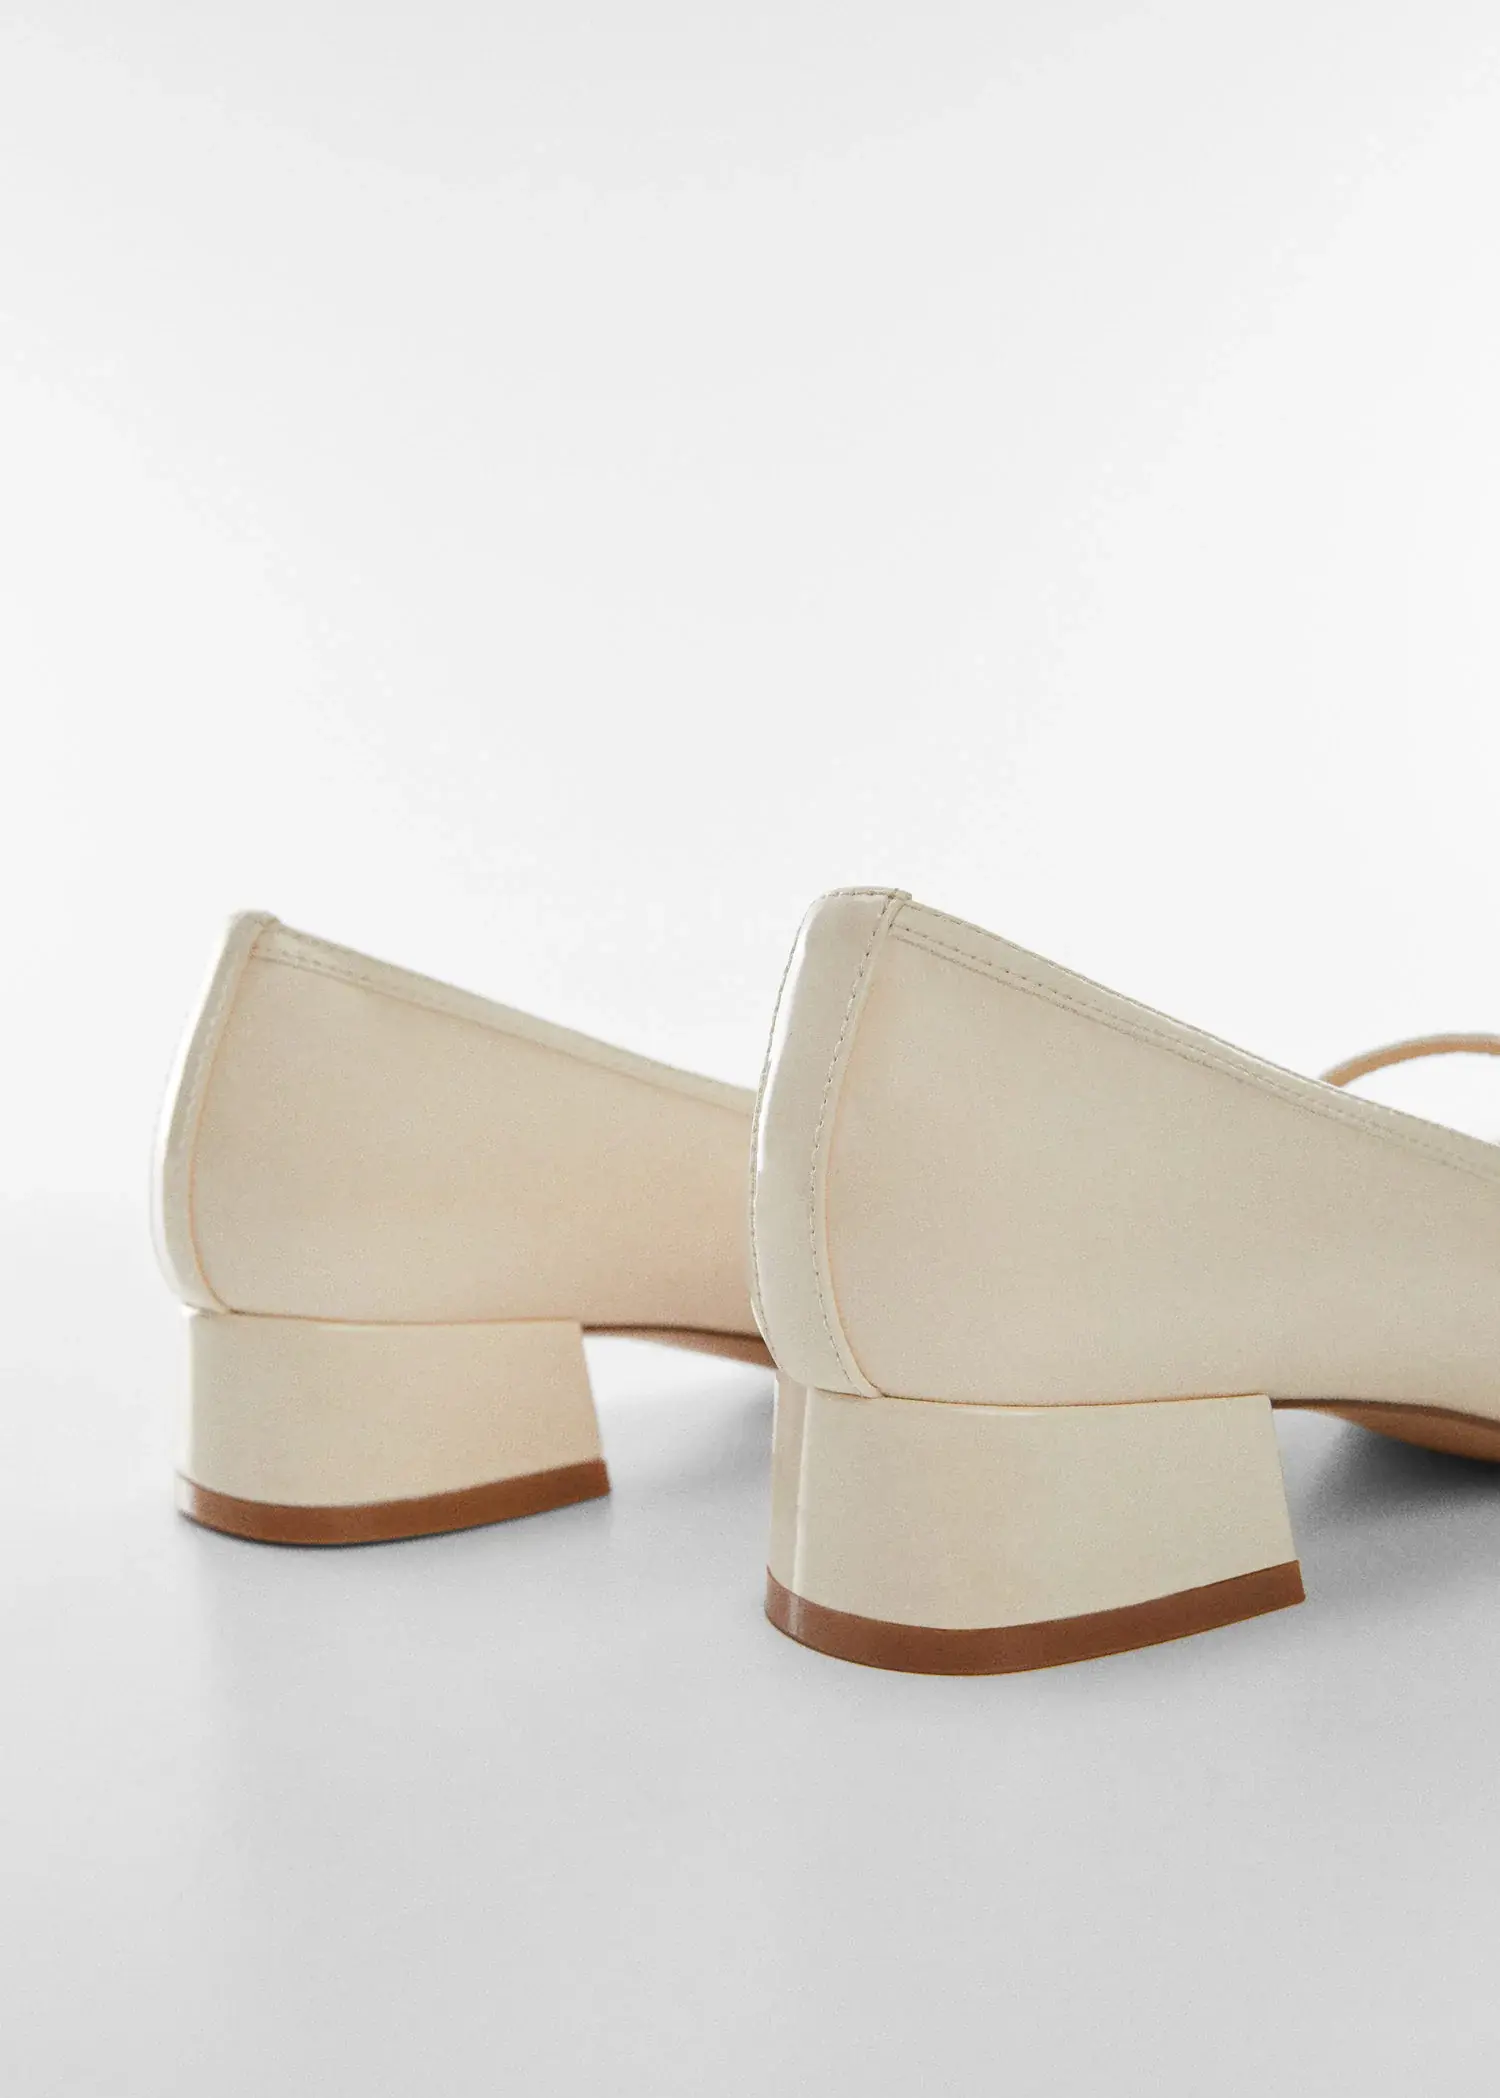 Mango Heeled shoes with buckle. a close up of a pair of shoes on a white surface 